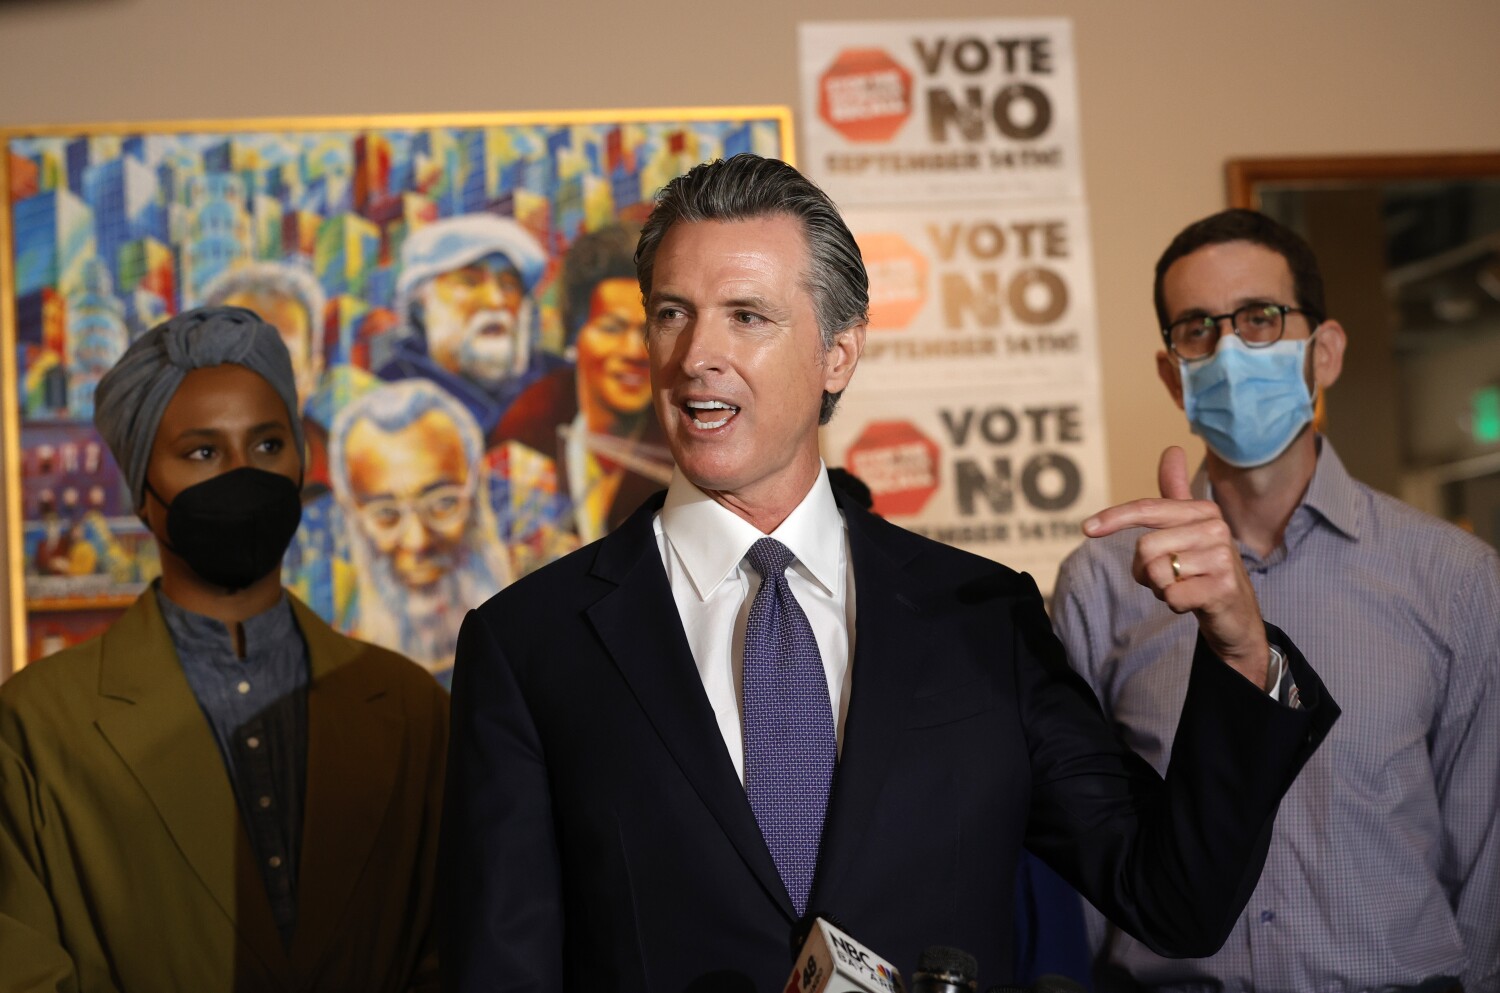  To fight the recall, Newsom and allies spent $36 million in August alone